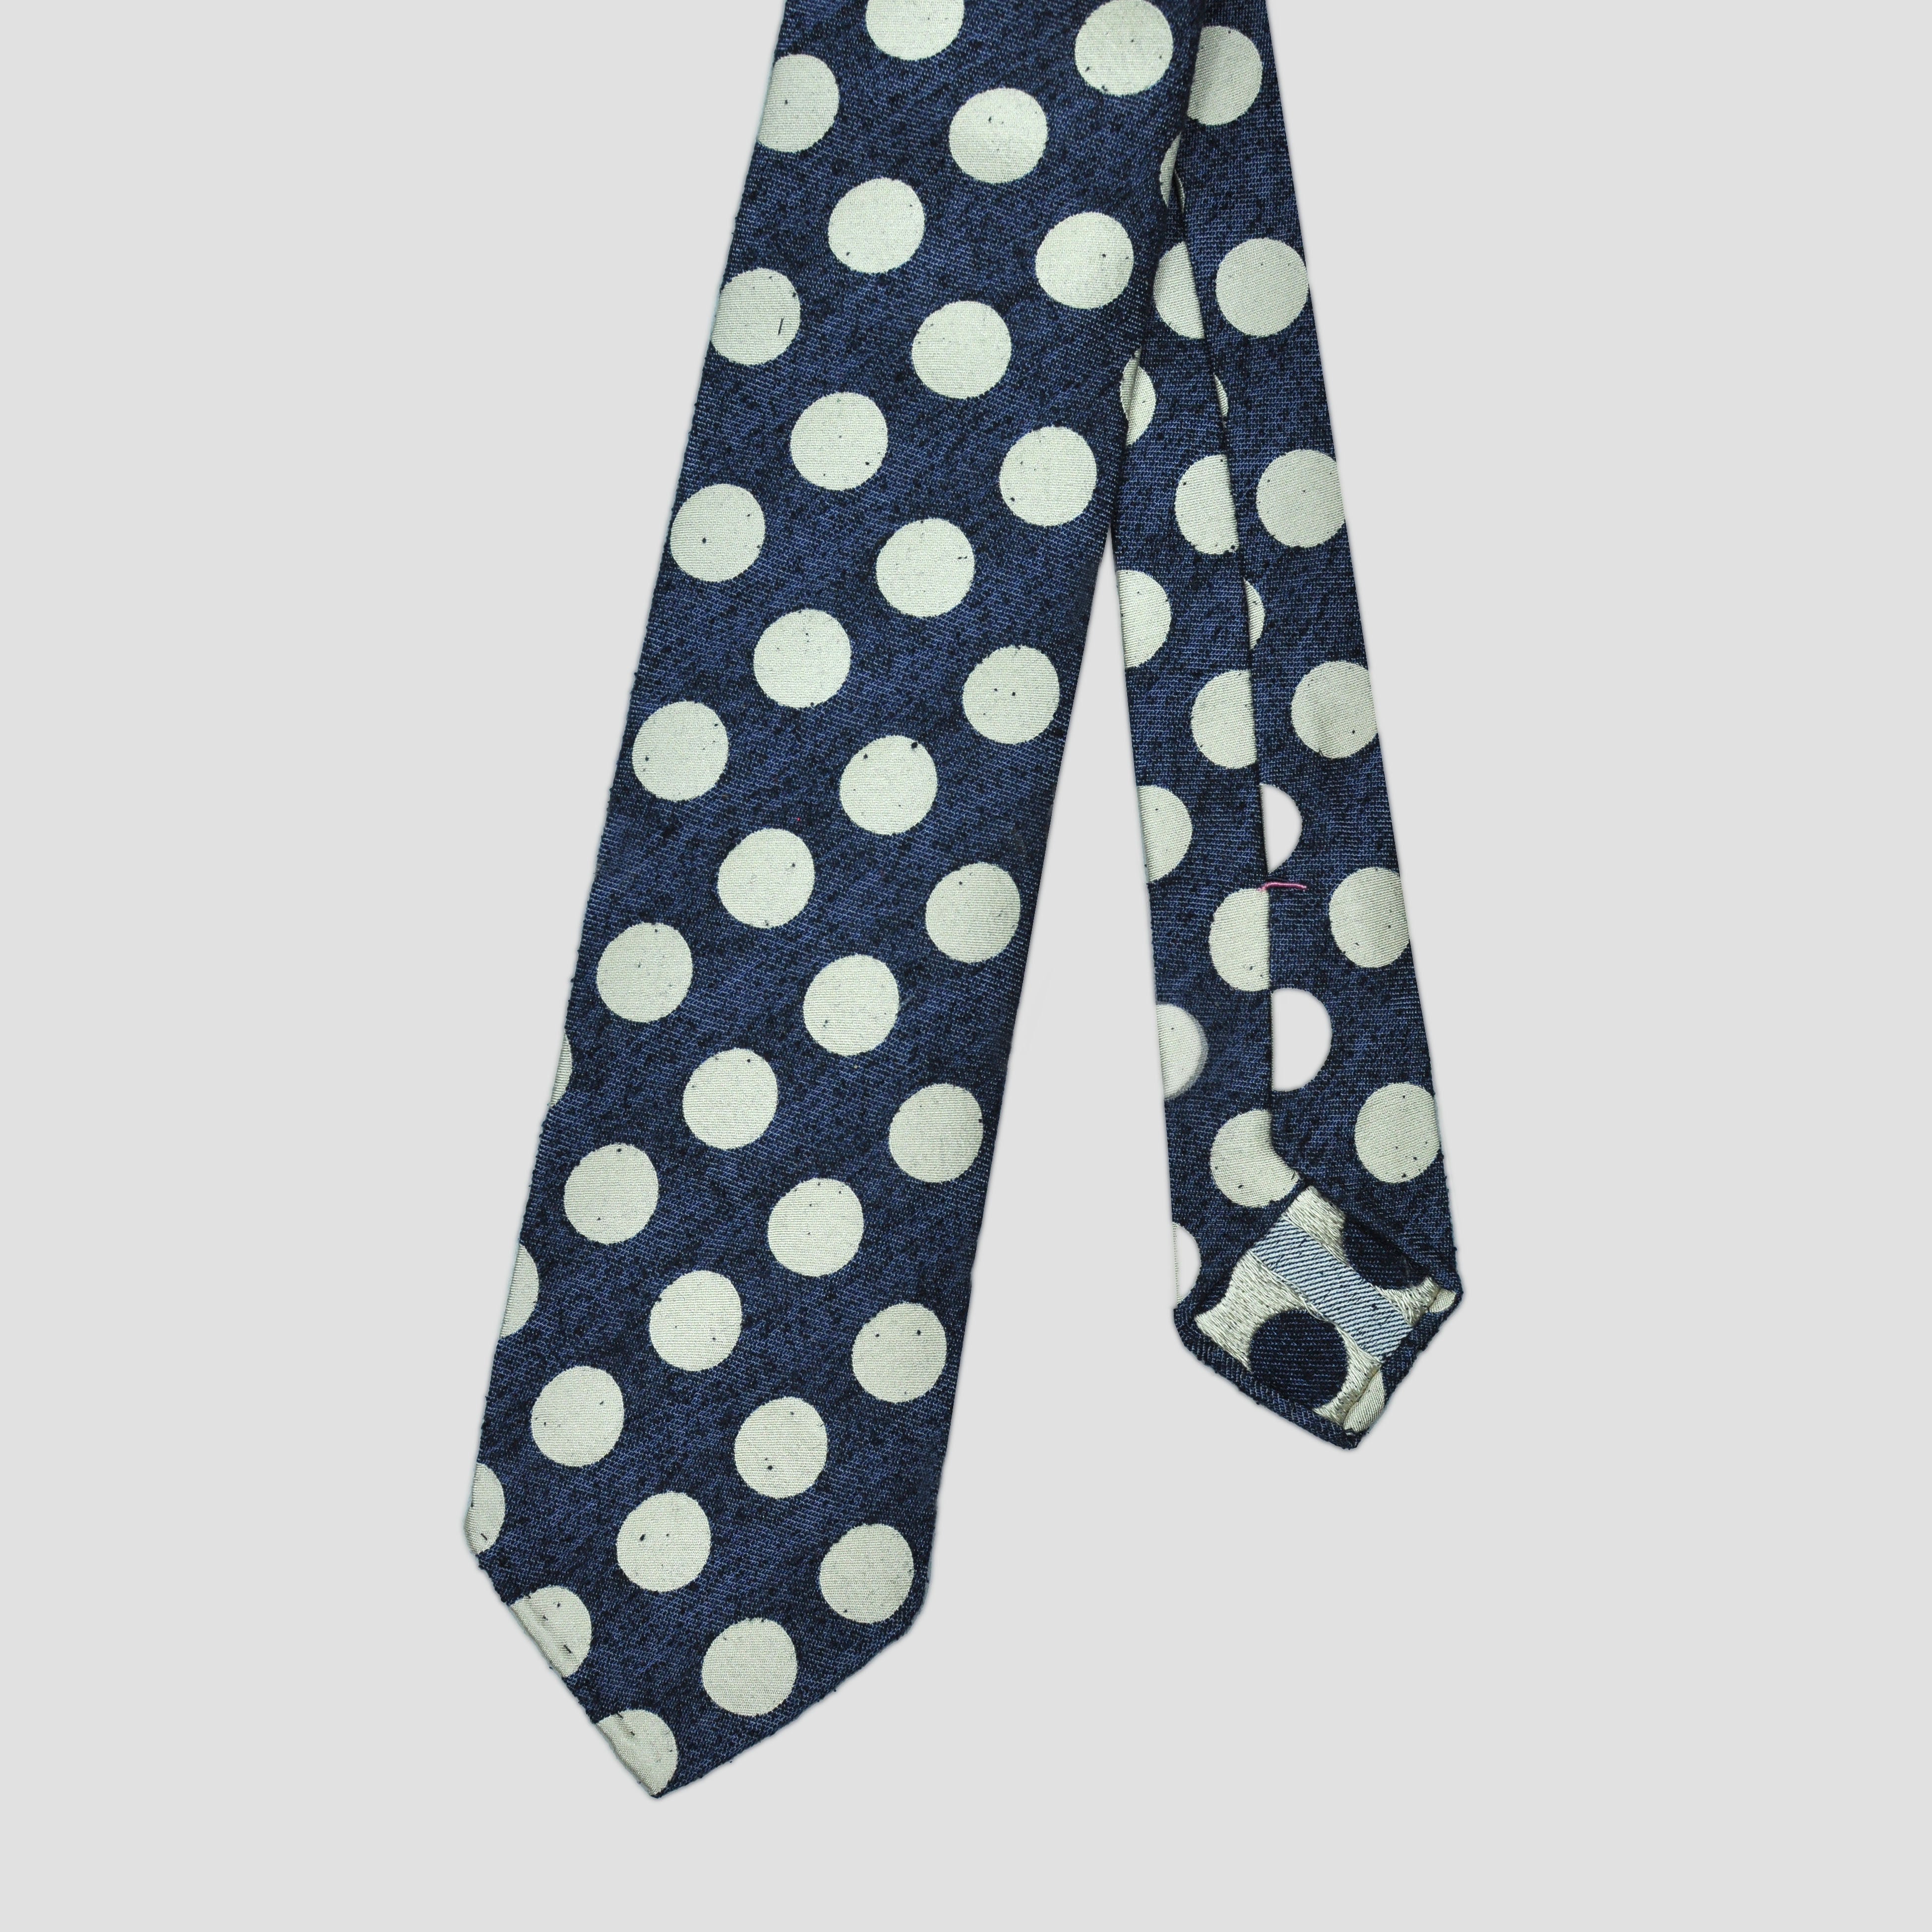 Handrolled Raw Silk & Linen Tie in Navy with White Spots